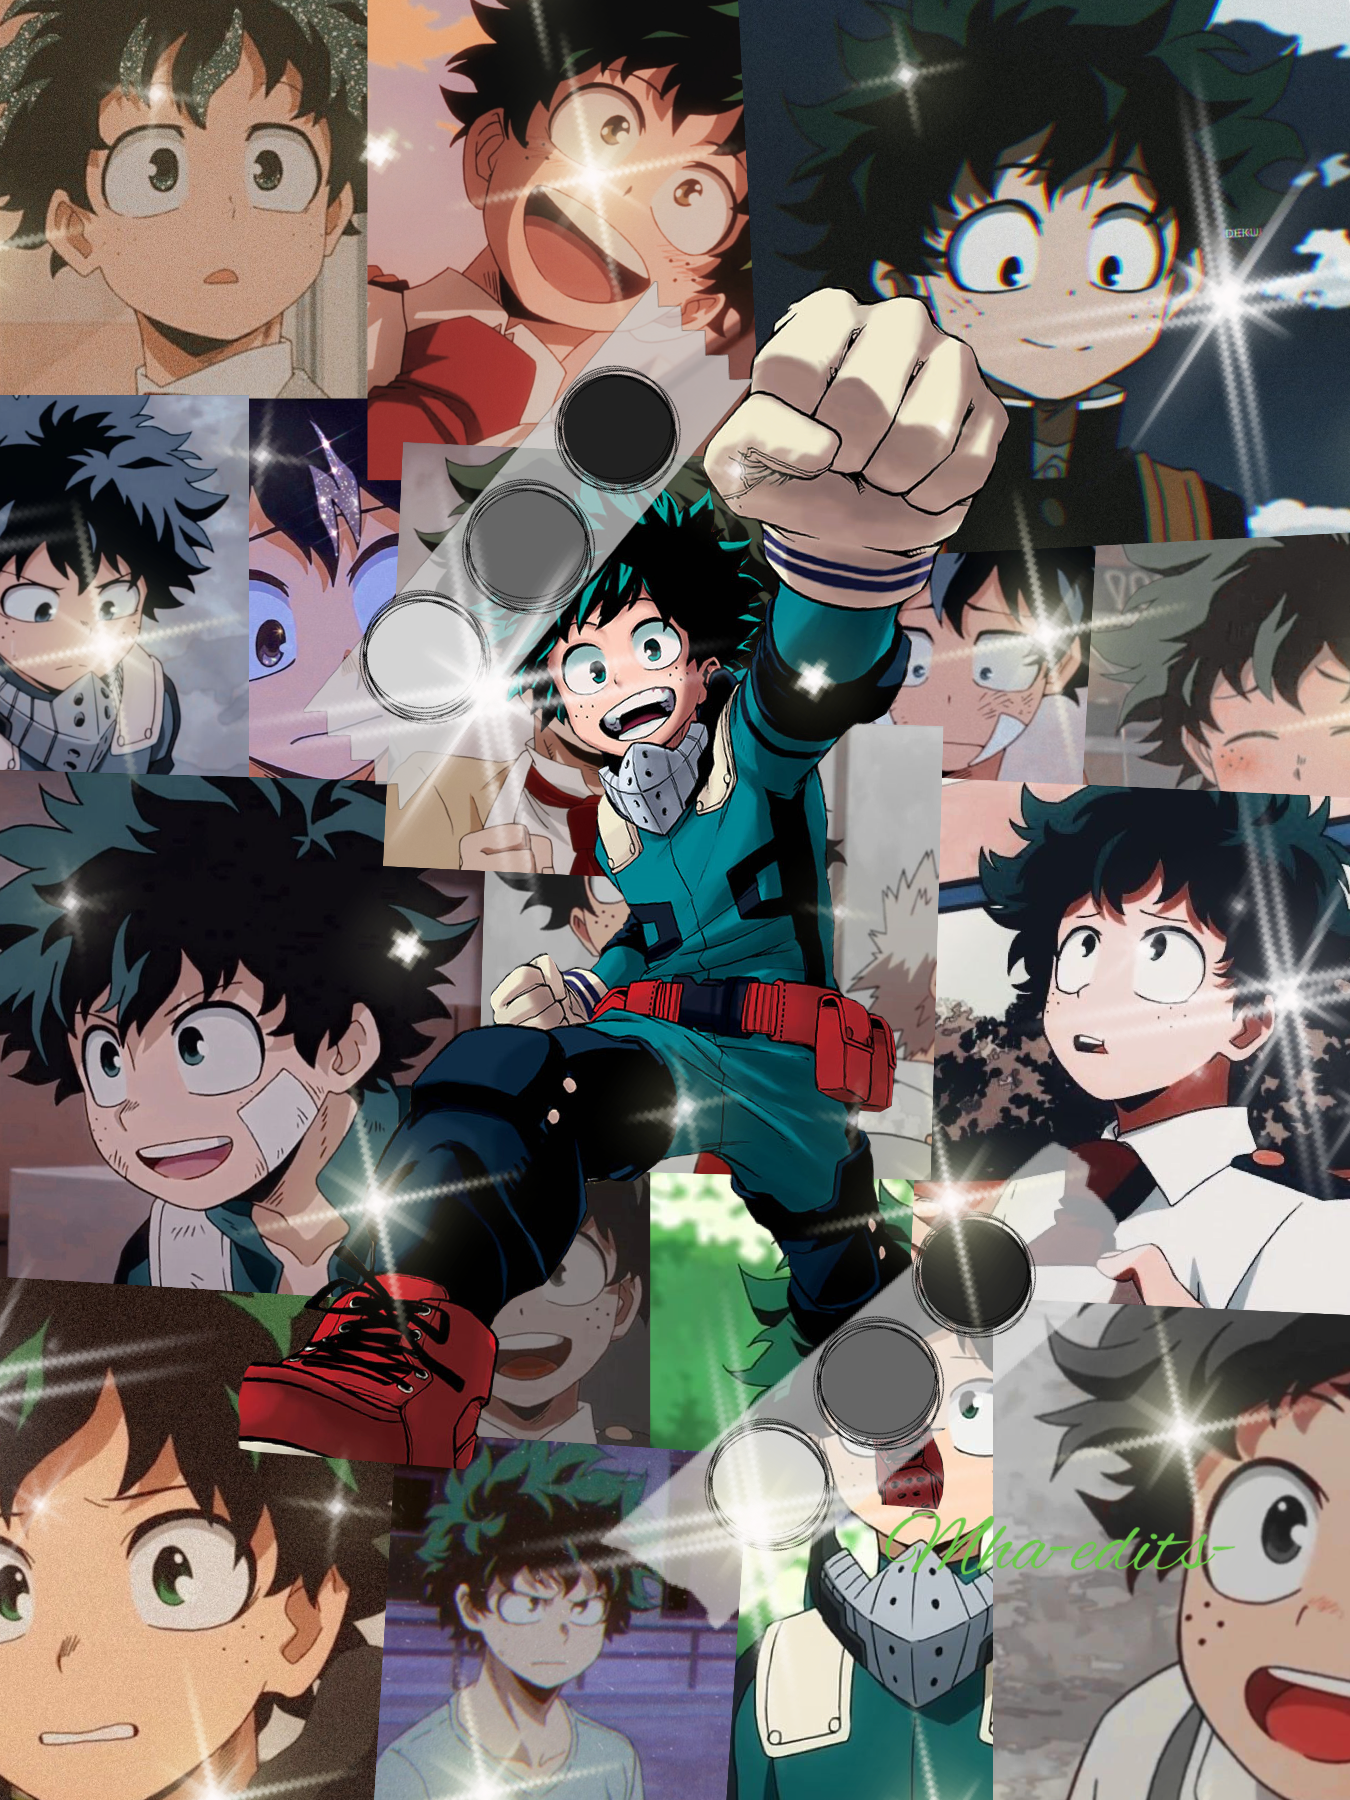 (🥦tap🥦)

Deku edit🥦🥴
The broccoli that almost everyone loves🥦👏🏻
I love this! 
Low-key proud rn💀